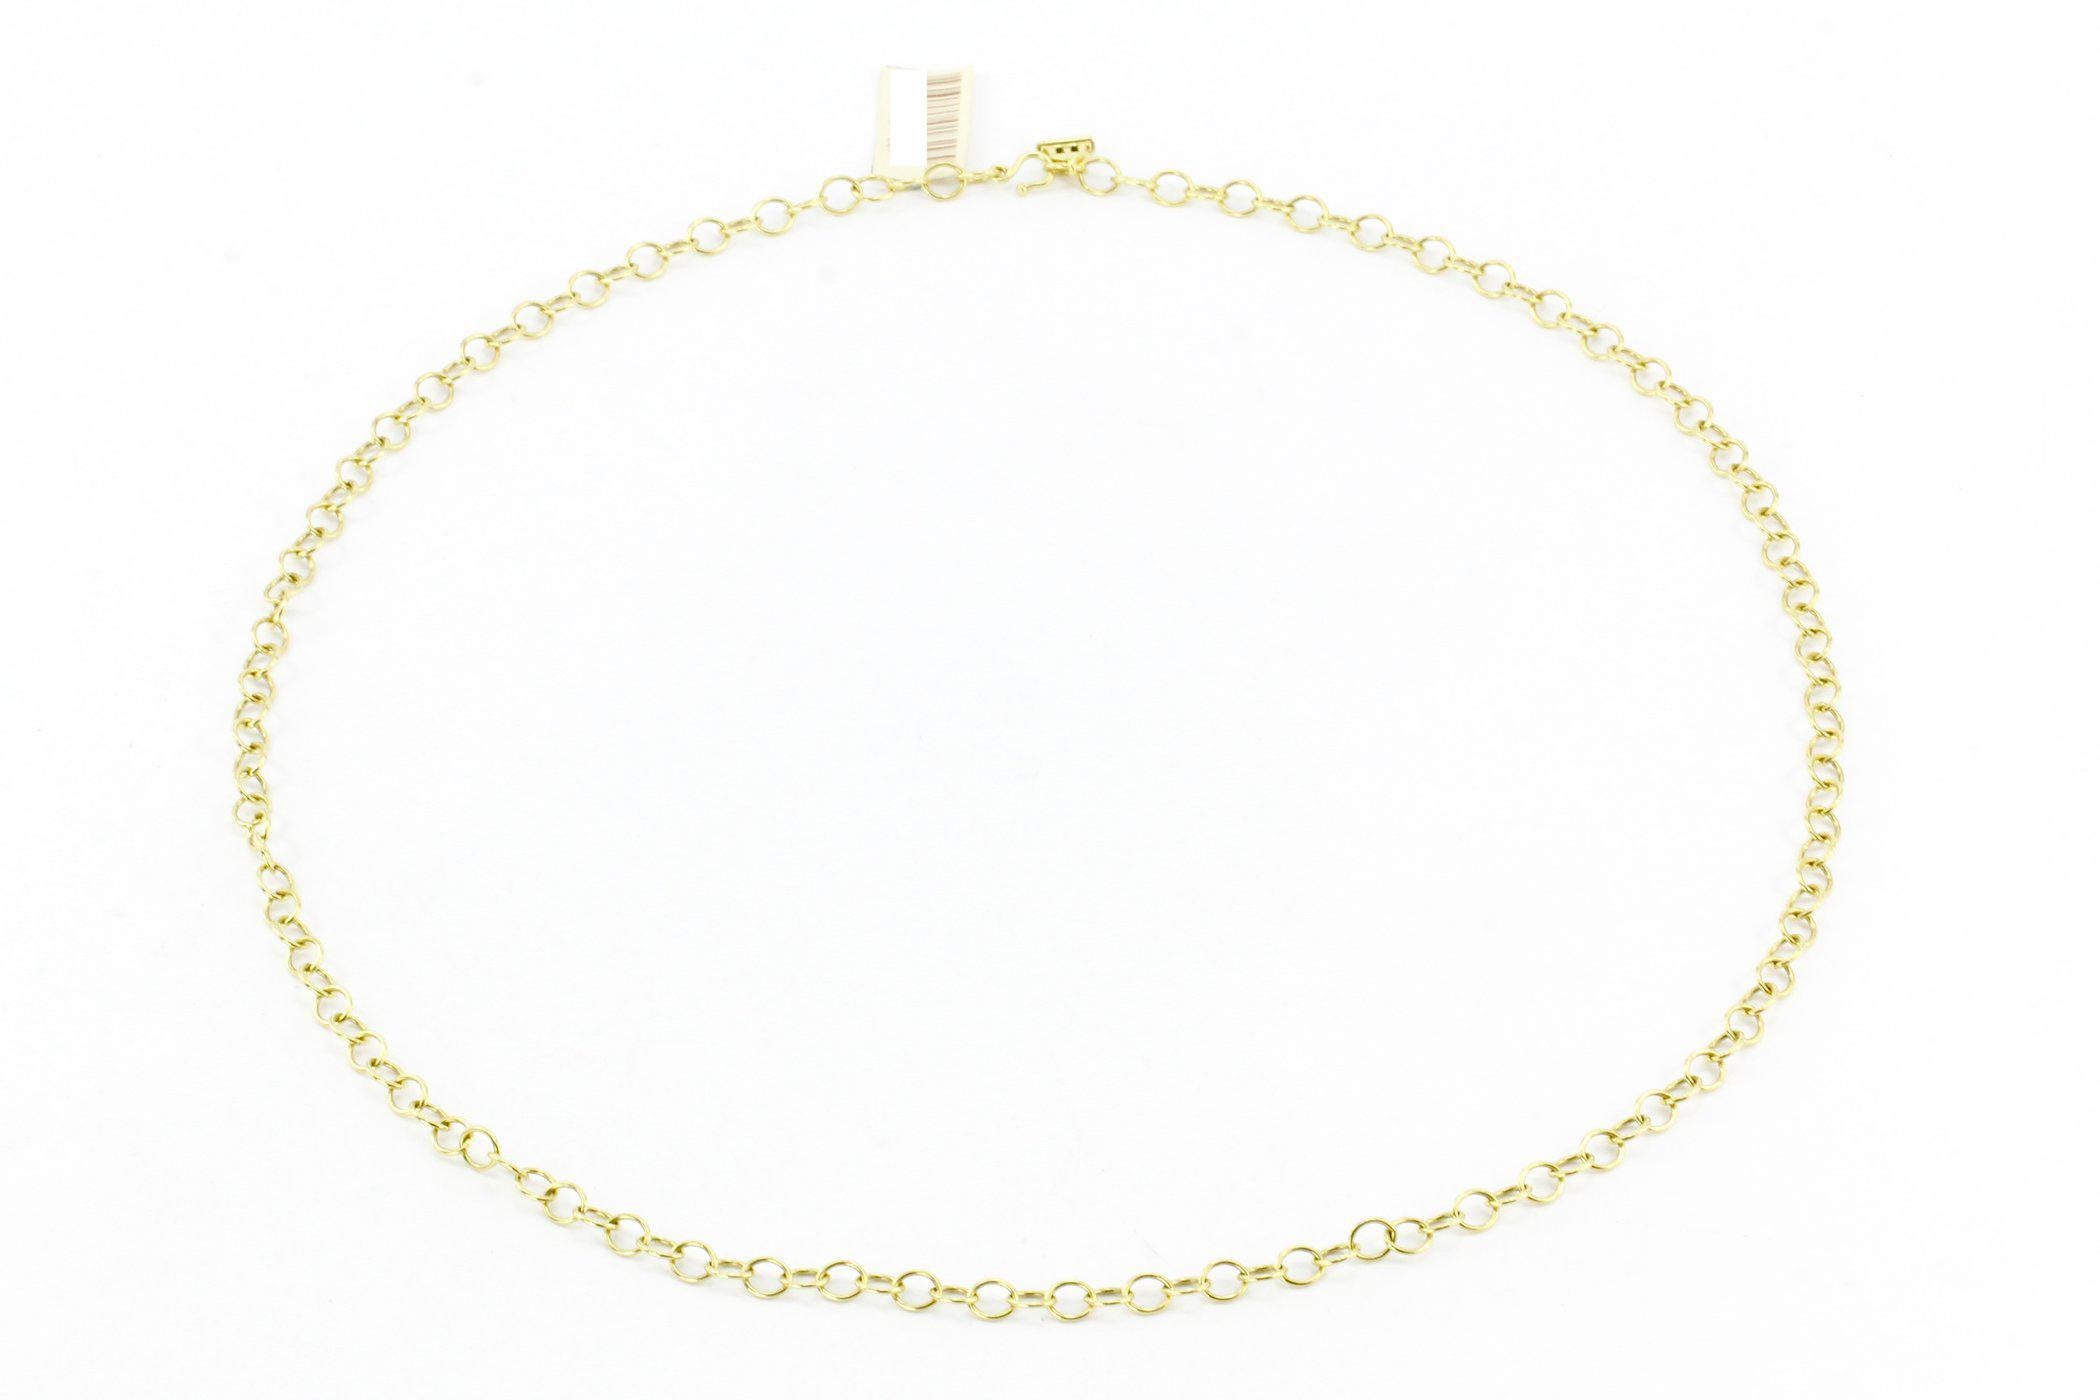 Hallmarks: 750 with Temple St. Clair Hallmark

Composition: 18K Yellow Gold

Total length: 32 inches

Necklace Weight: 36.1 grams

Necklace Condition: New With Tags, Never Worn